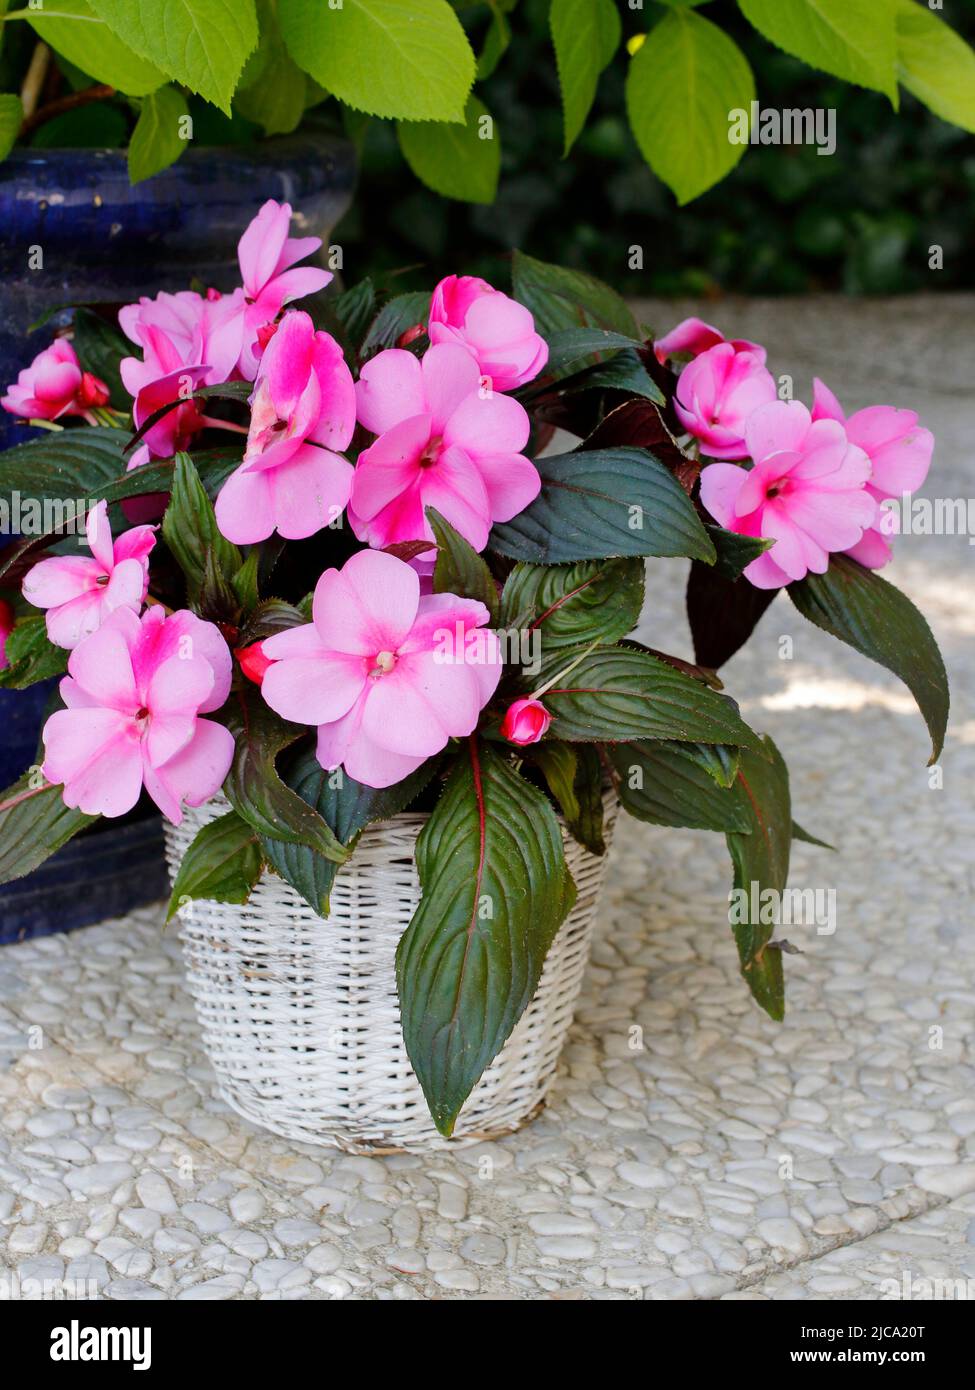 A pretty Busy Lizzie flower with pink blossoms in a white pot on the terrace Stock Photo